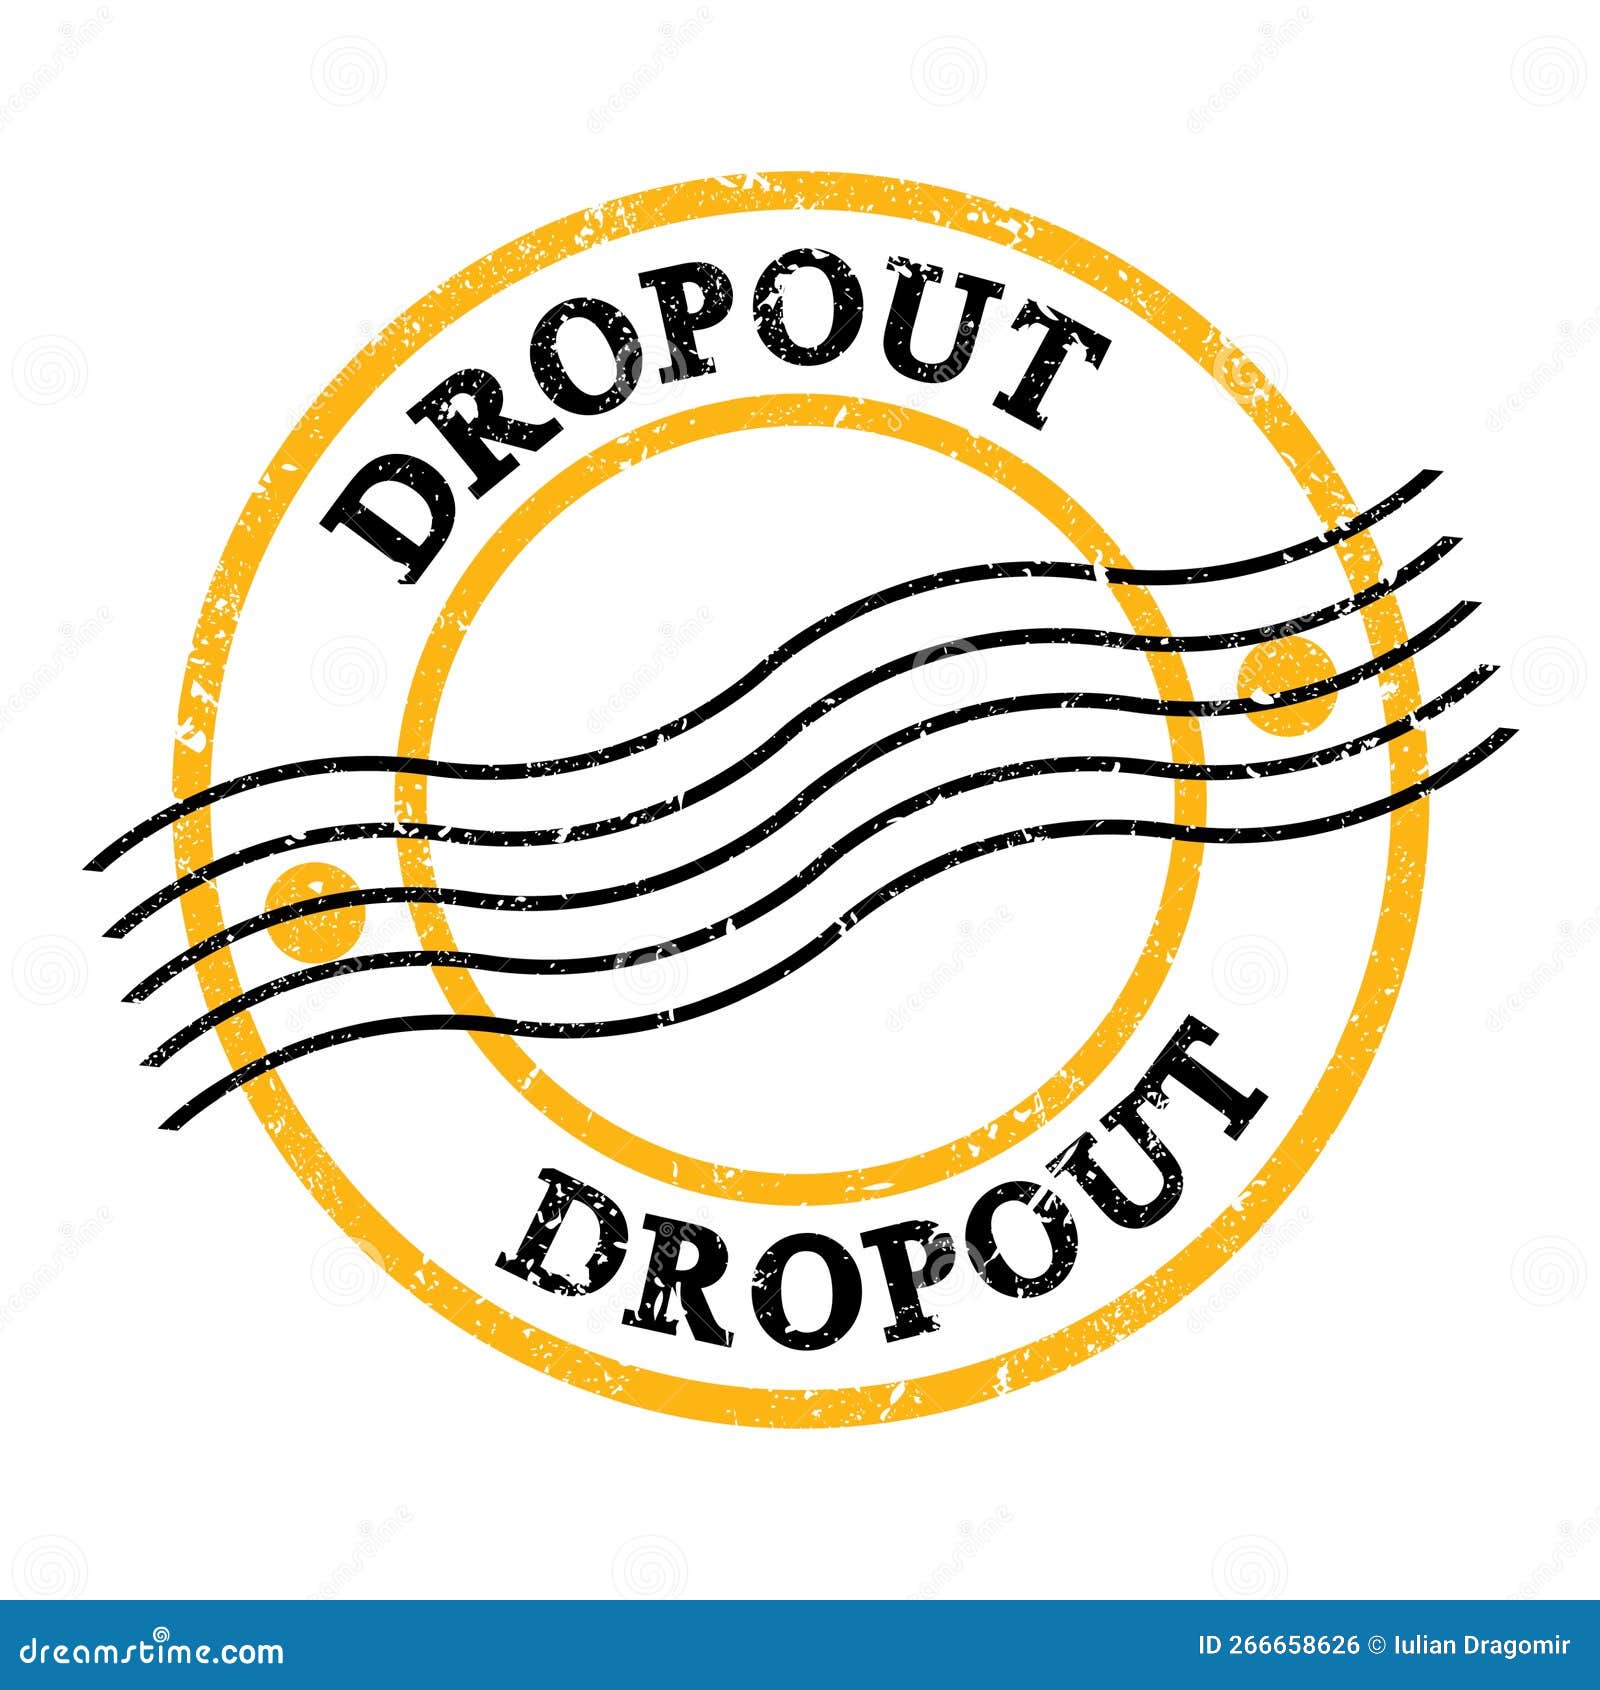 dropout, text on yellow-black grungy postal stamp